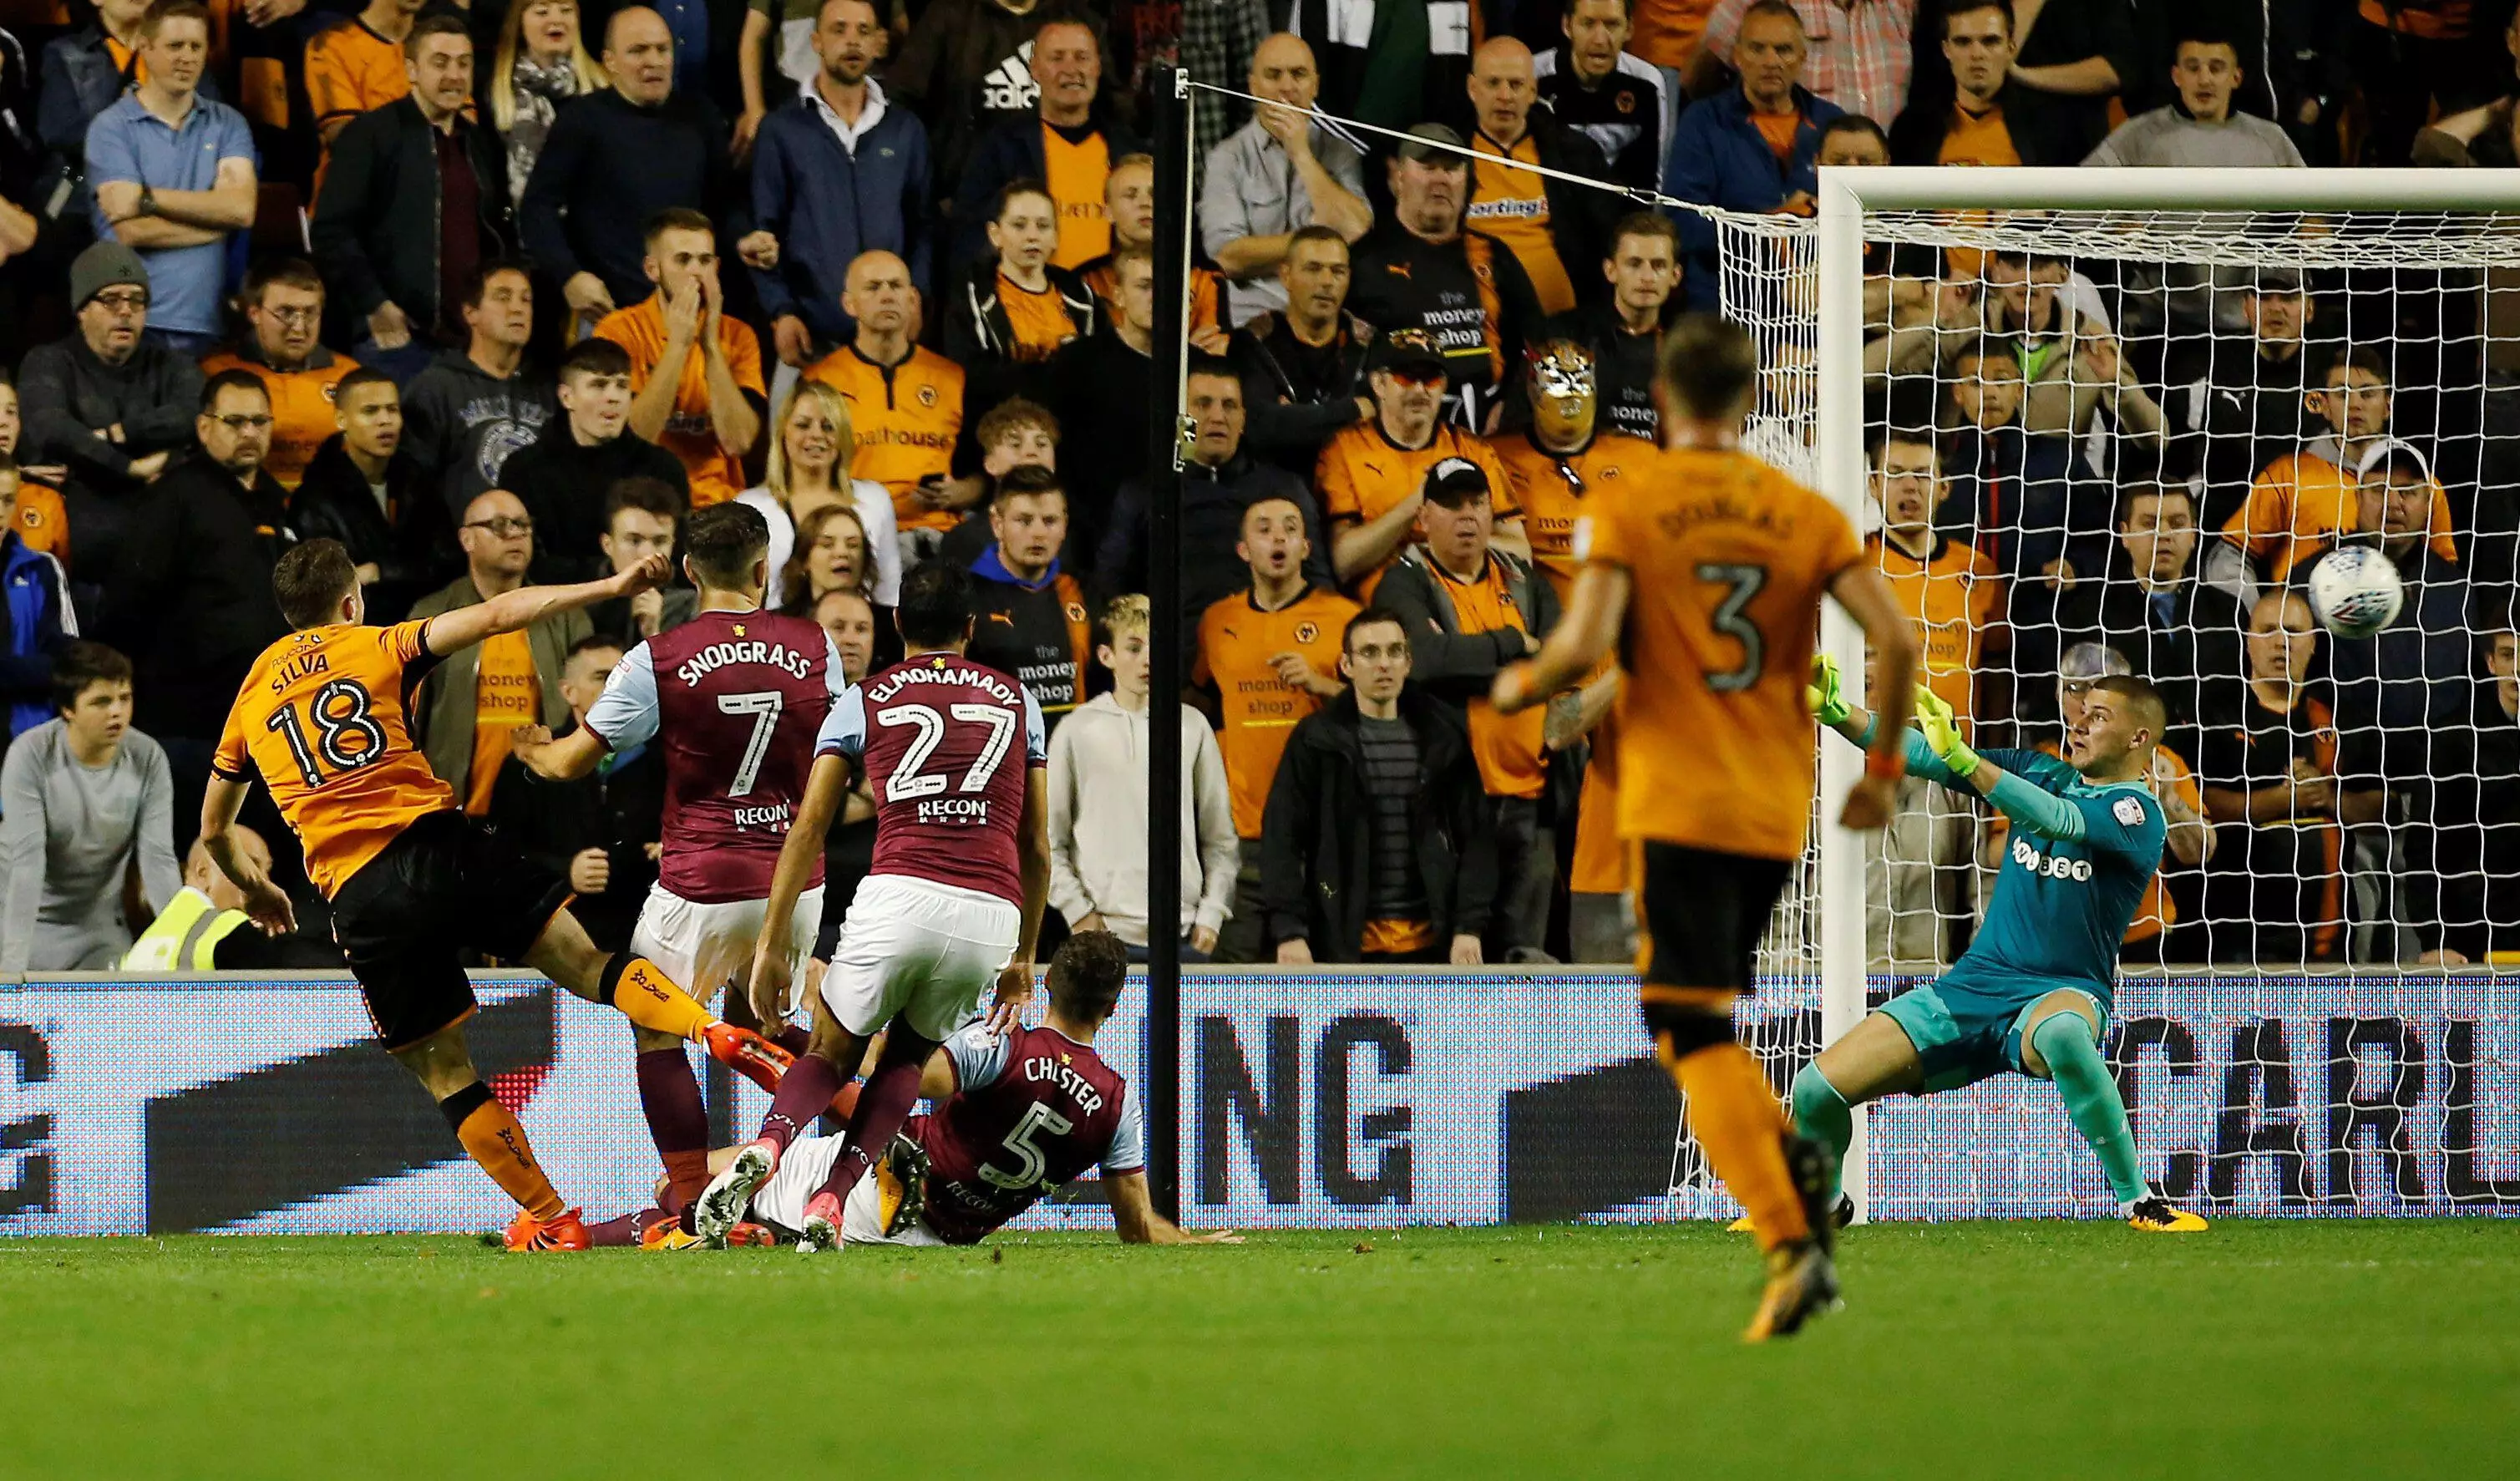 Jota used the named Silva in his first season at Wolves (Image: PA)